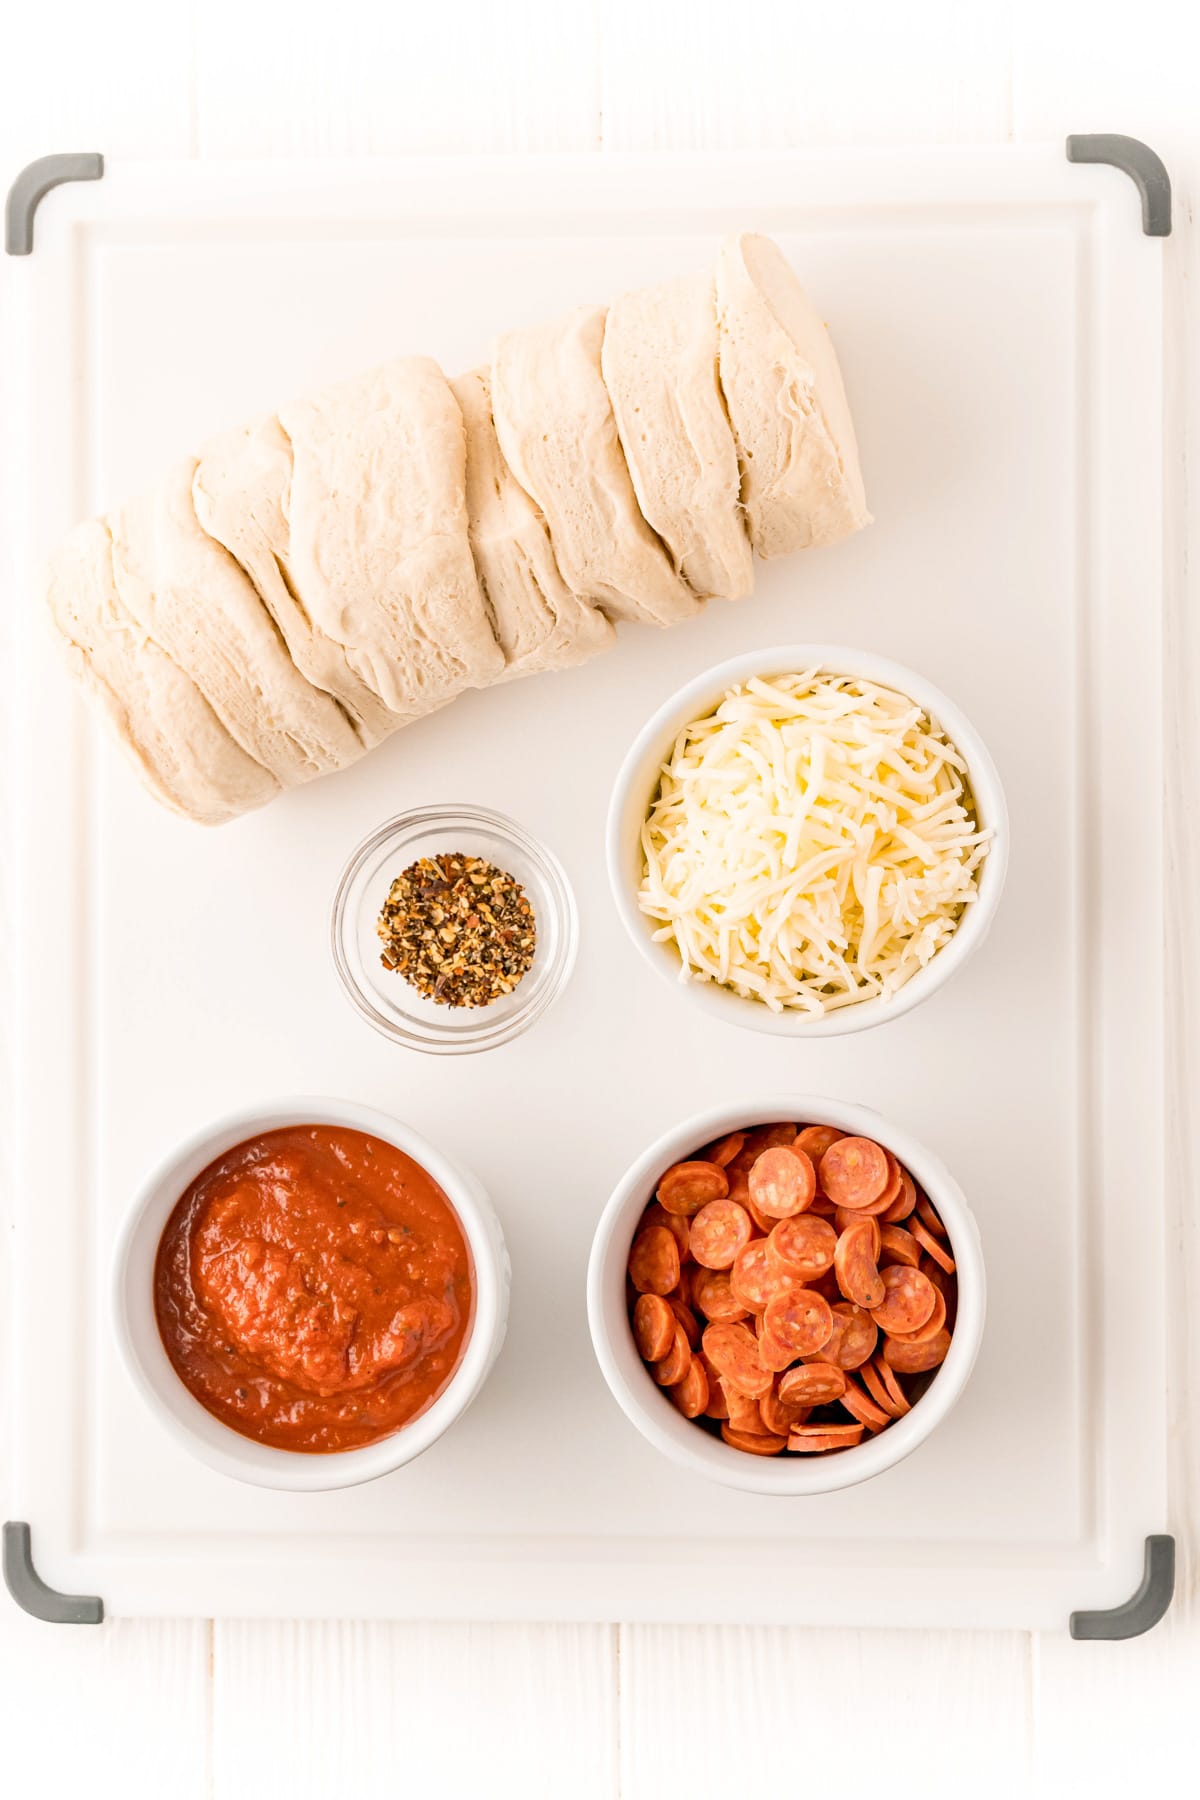 Ingredients needed to make a Mini Air Fryer Pizza recipe.